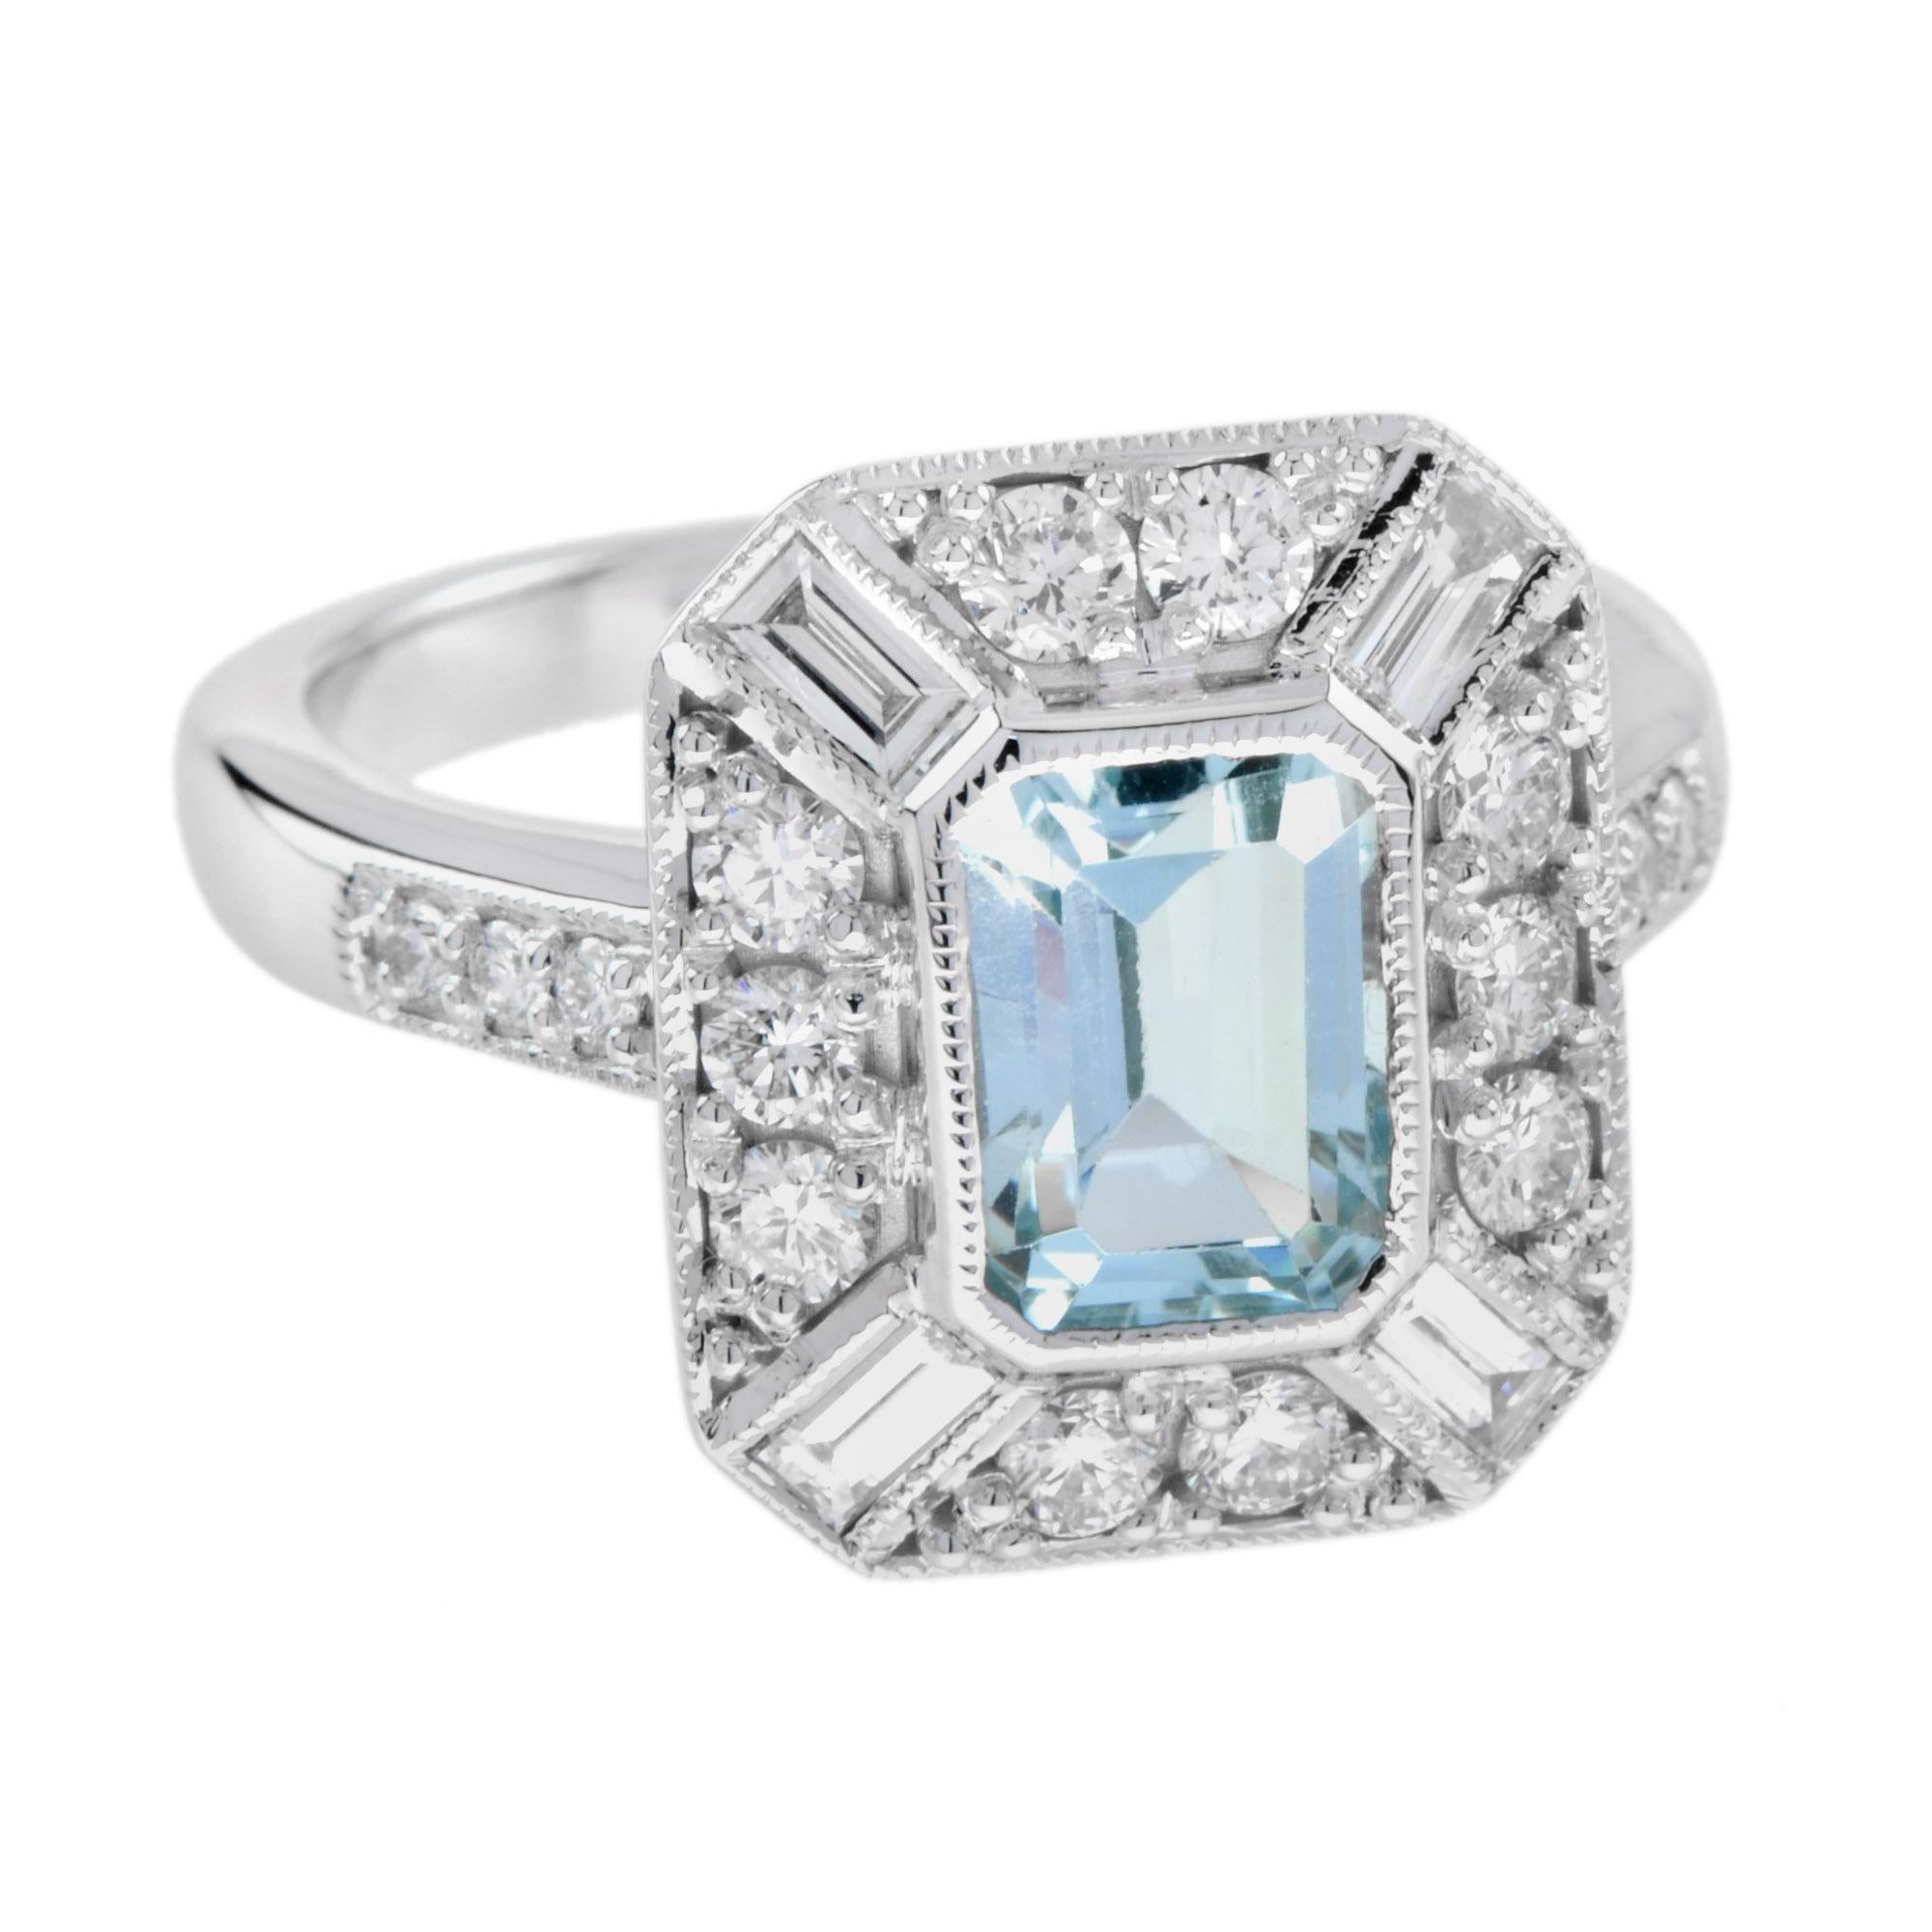 Simply stunning! Exquisitely crafted in 18k white gold, the ring features emerald cut 1.5 carat aquamarine surrounded by .88 carat round and baguette diamonds. This Art Deco inspired ring is a perfect piece for an engagement ring, or to commemorate